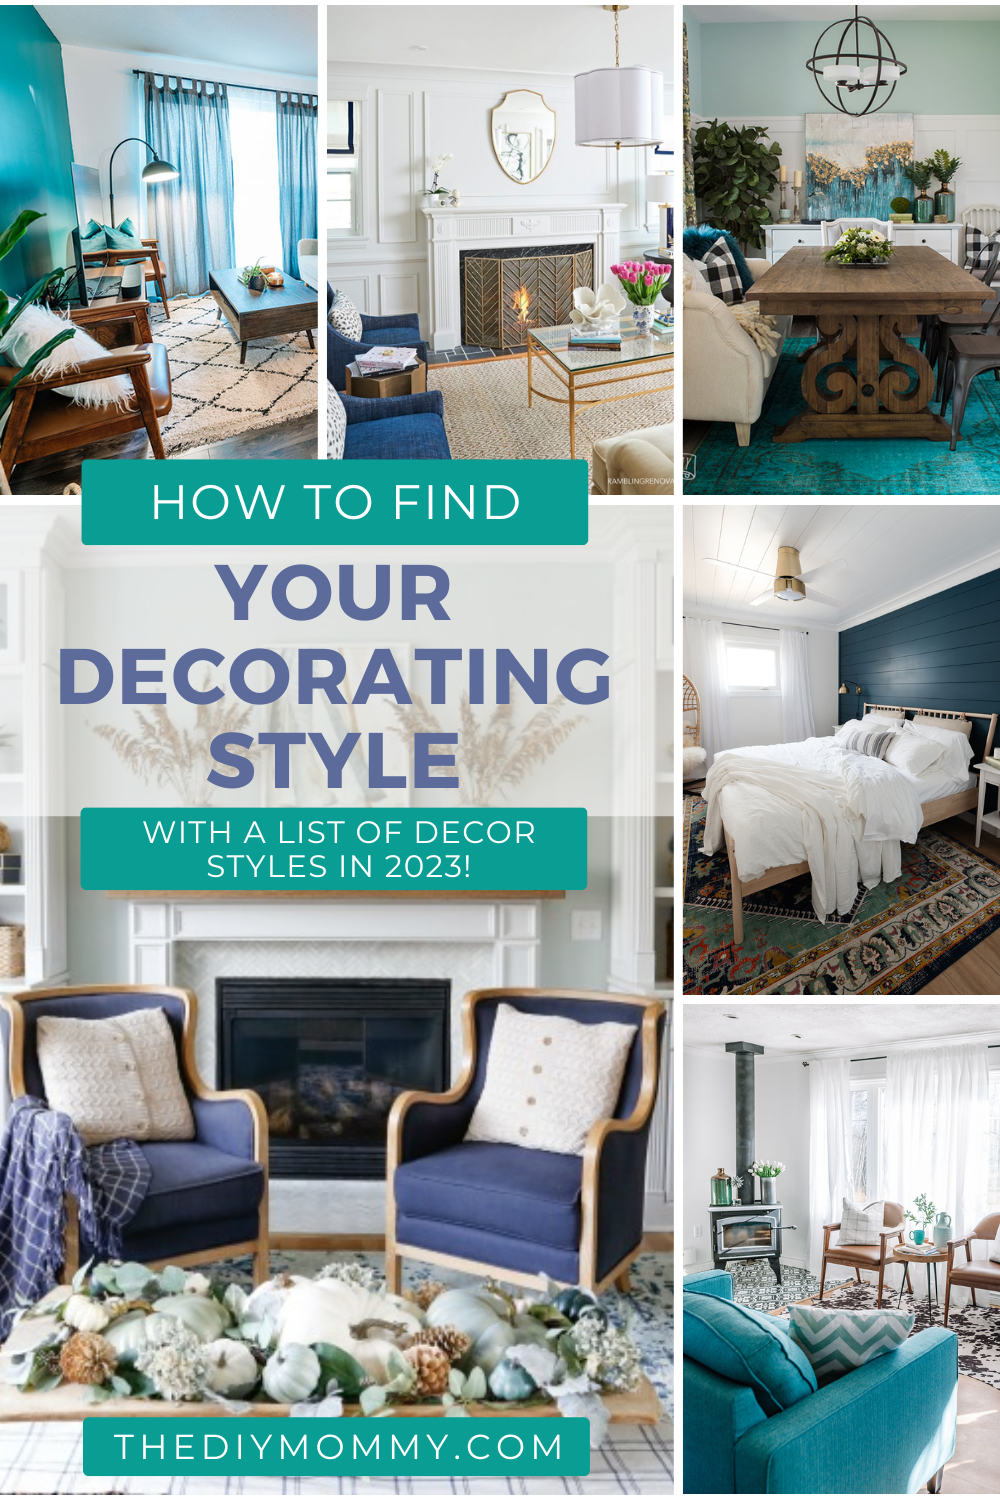 How to Find My Decorating Style (with a List of Decor Styles in 2023!)